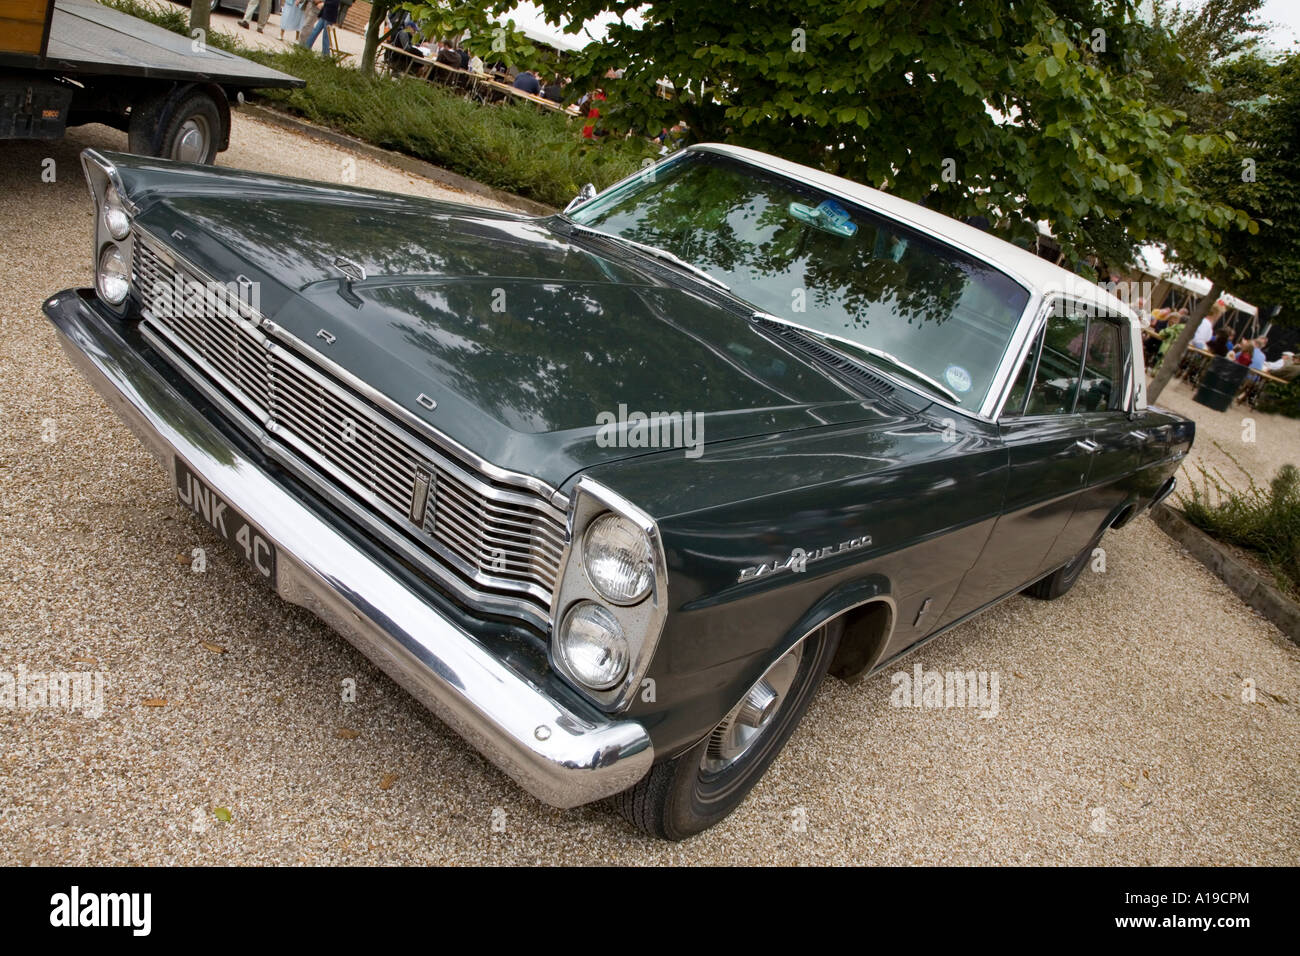 Ford Galaxie 500 exhibit at Goodwood Revival, Sussex, England. Stock Photo